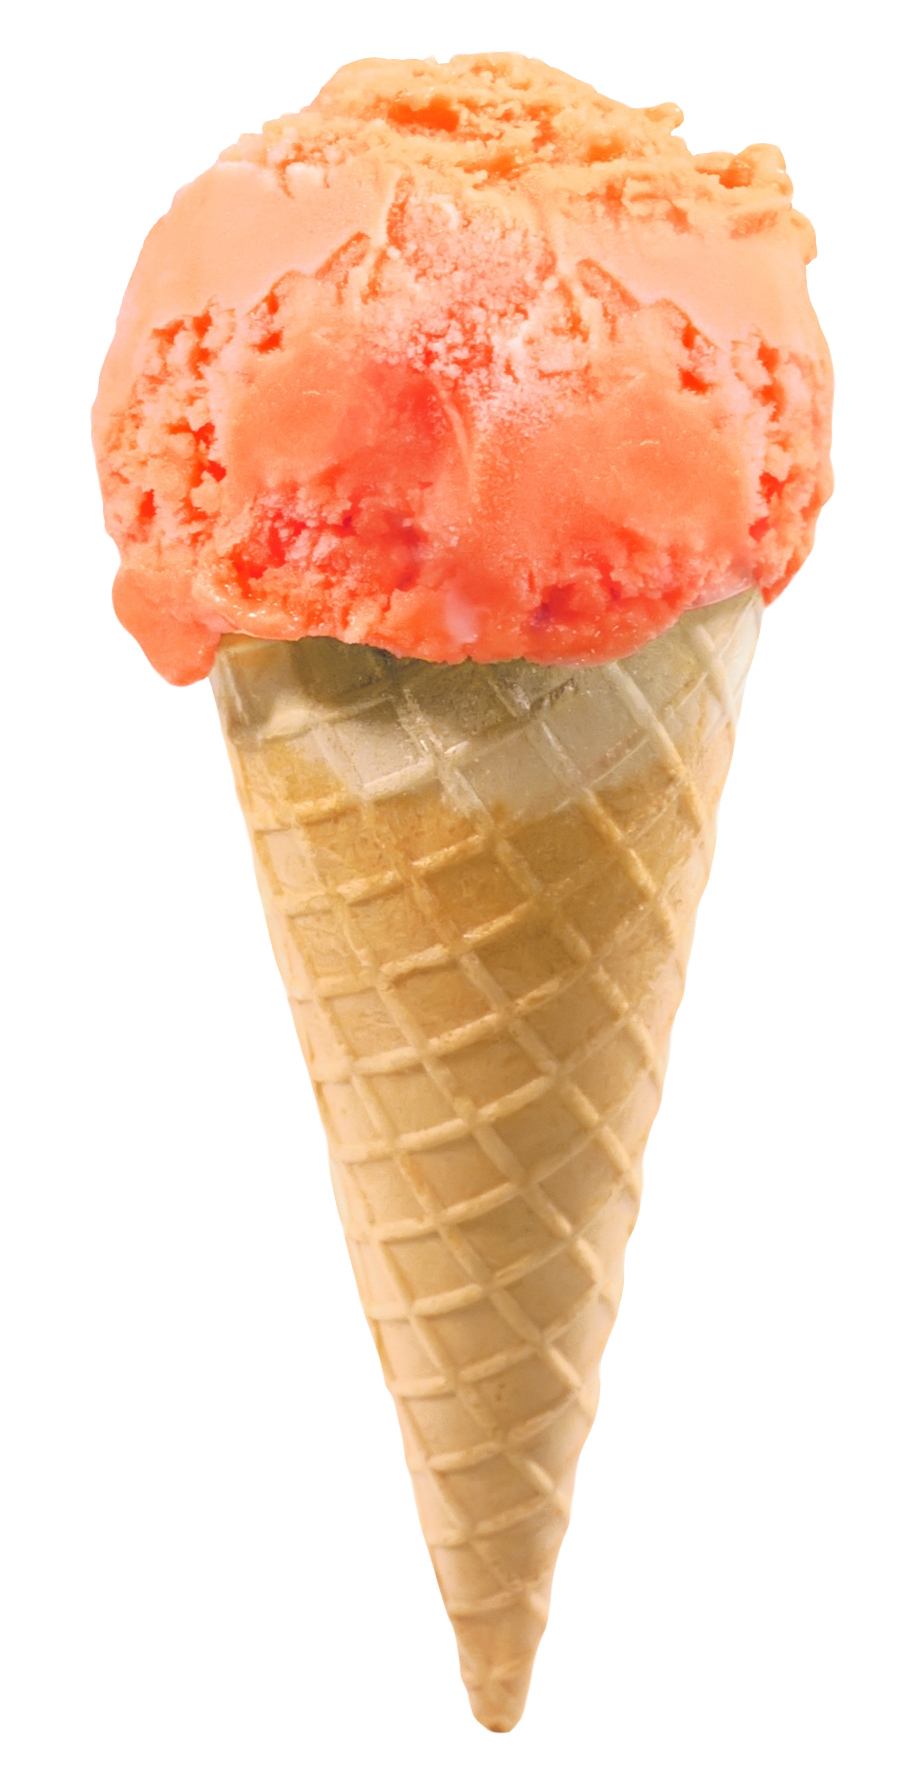 download ice cream cone png image for free download ice cream cone png image for free